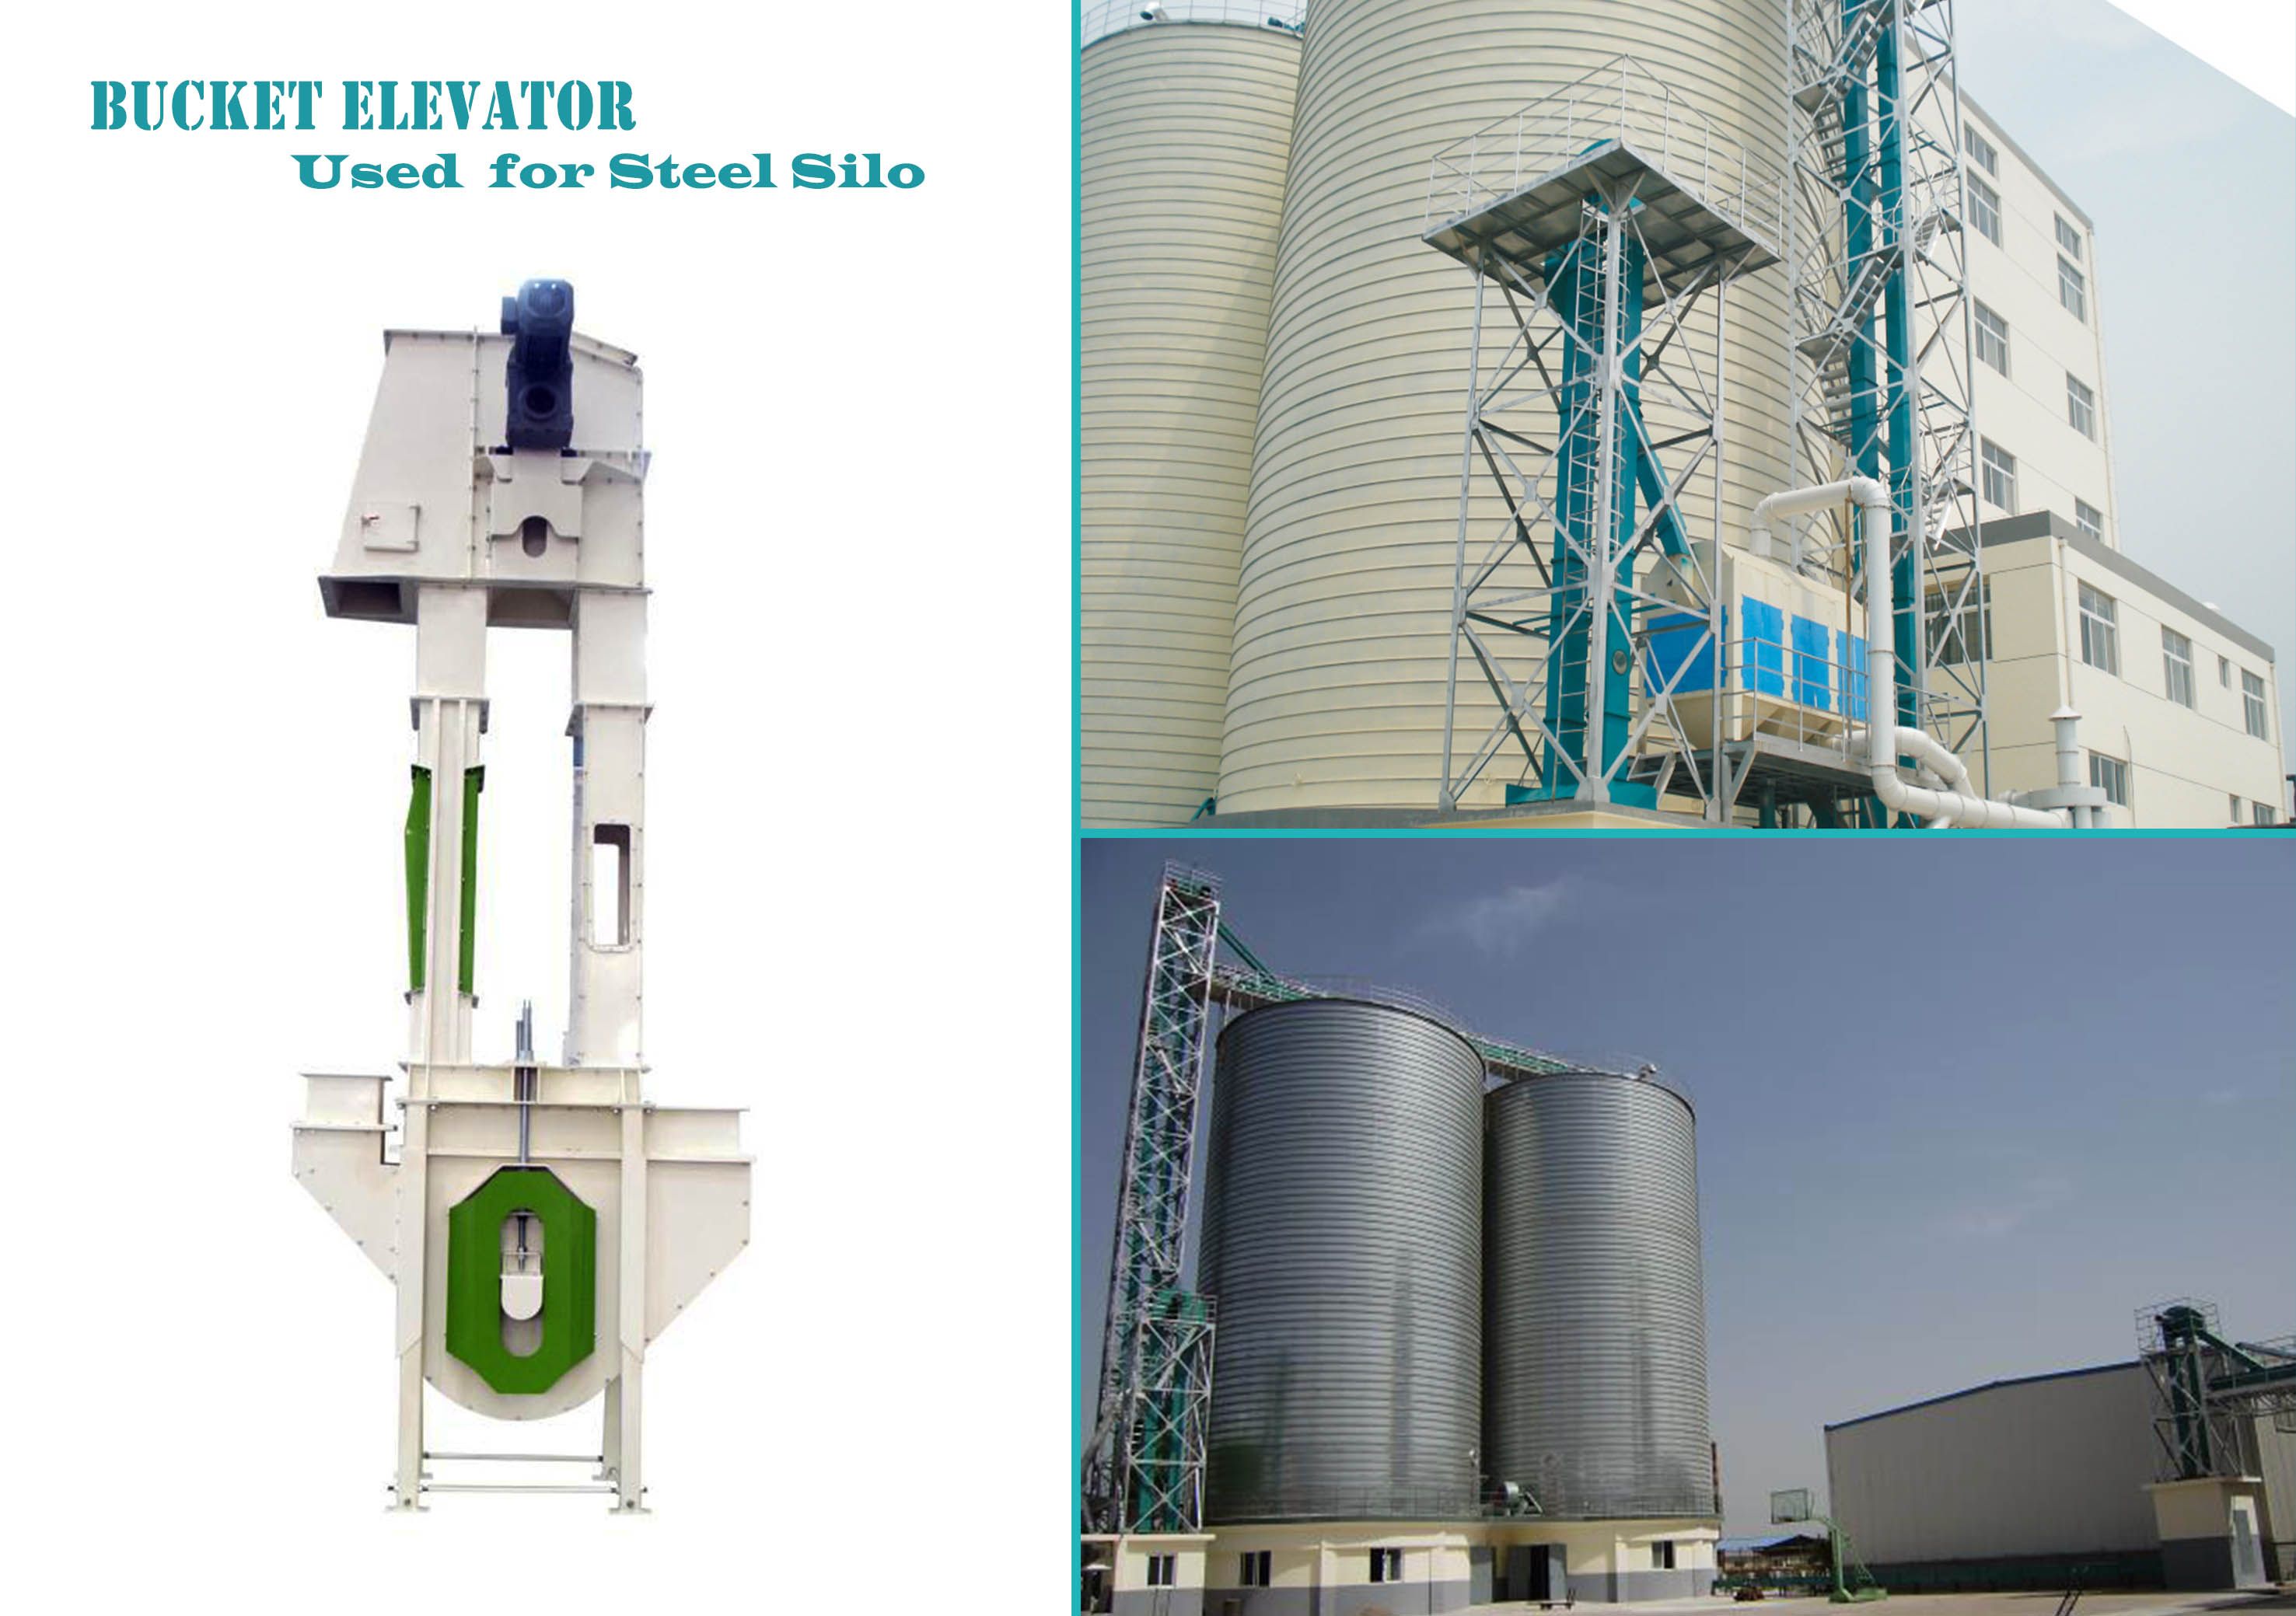 the application specifications of bucket elevator used for steel silo